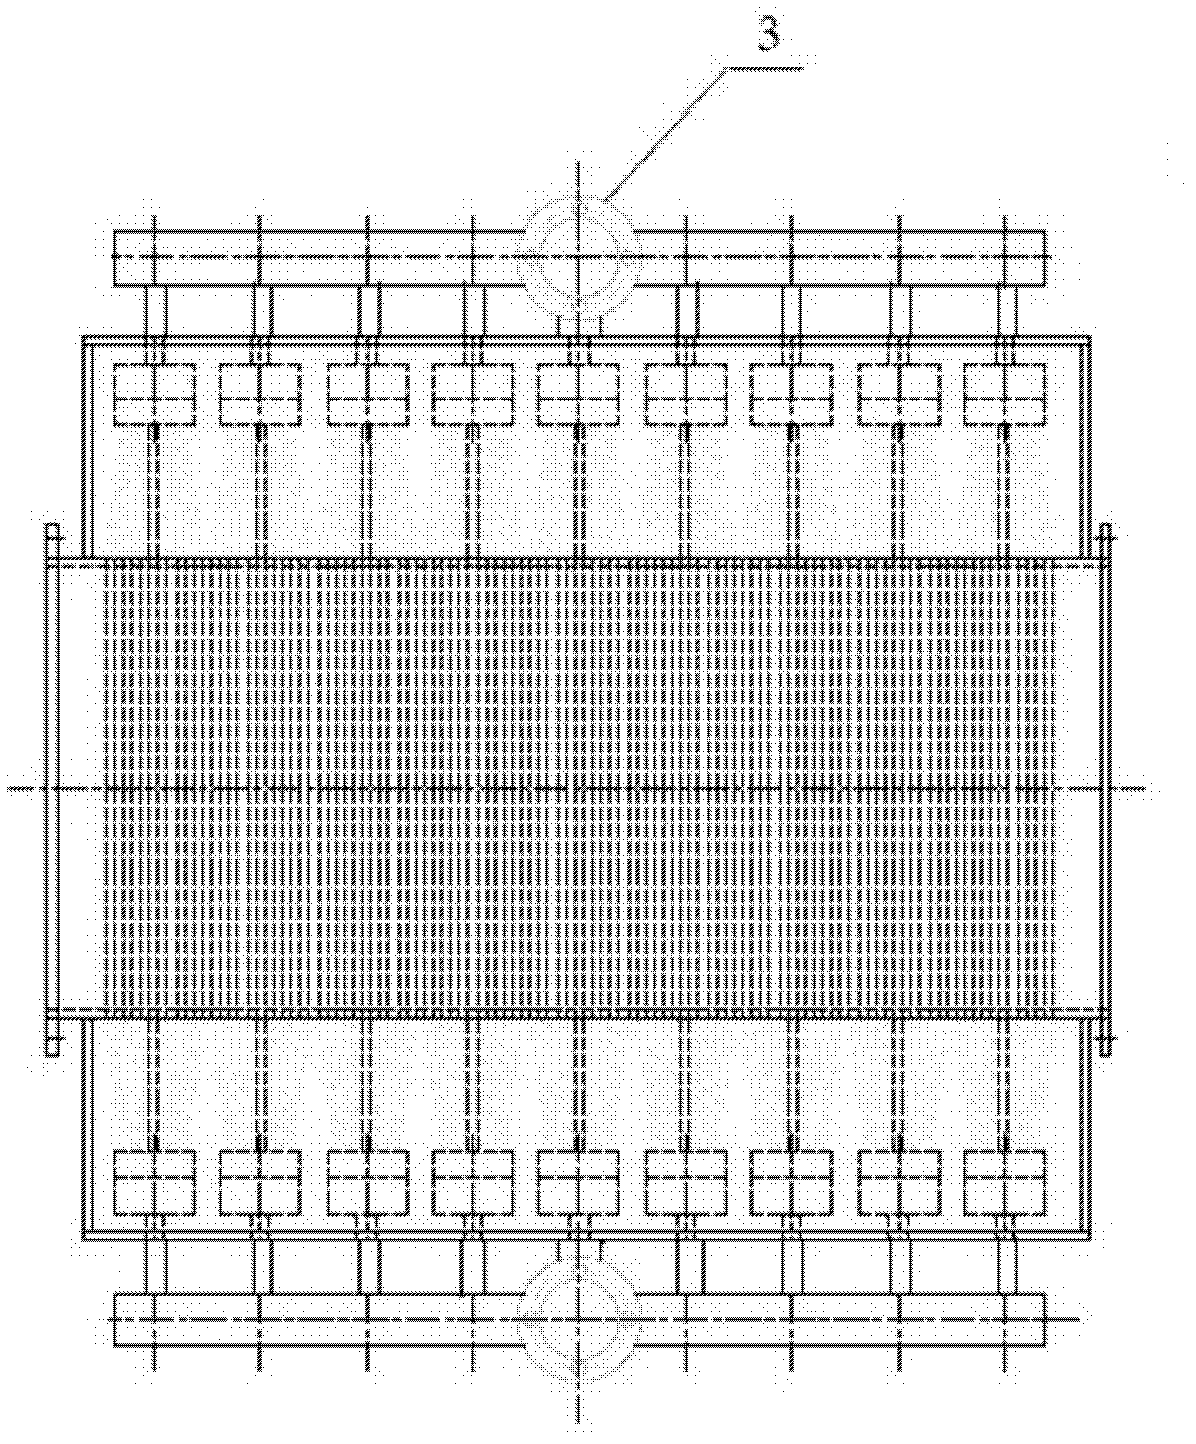 Smoke water condensing and waste heat recovering device